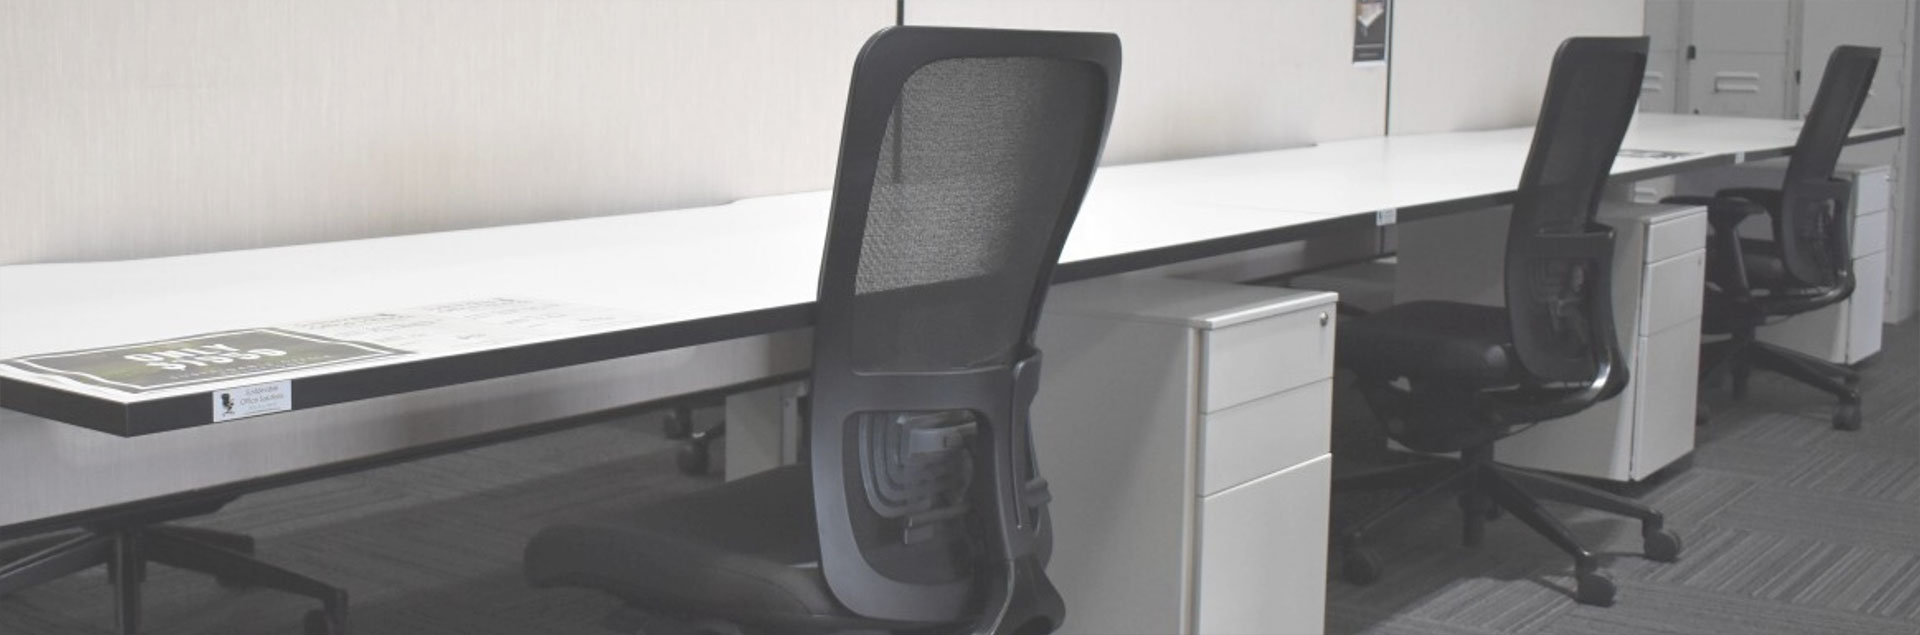 Contact Clean & Gone about selling office furniture